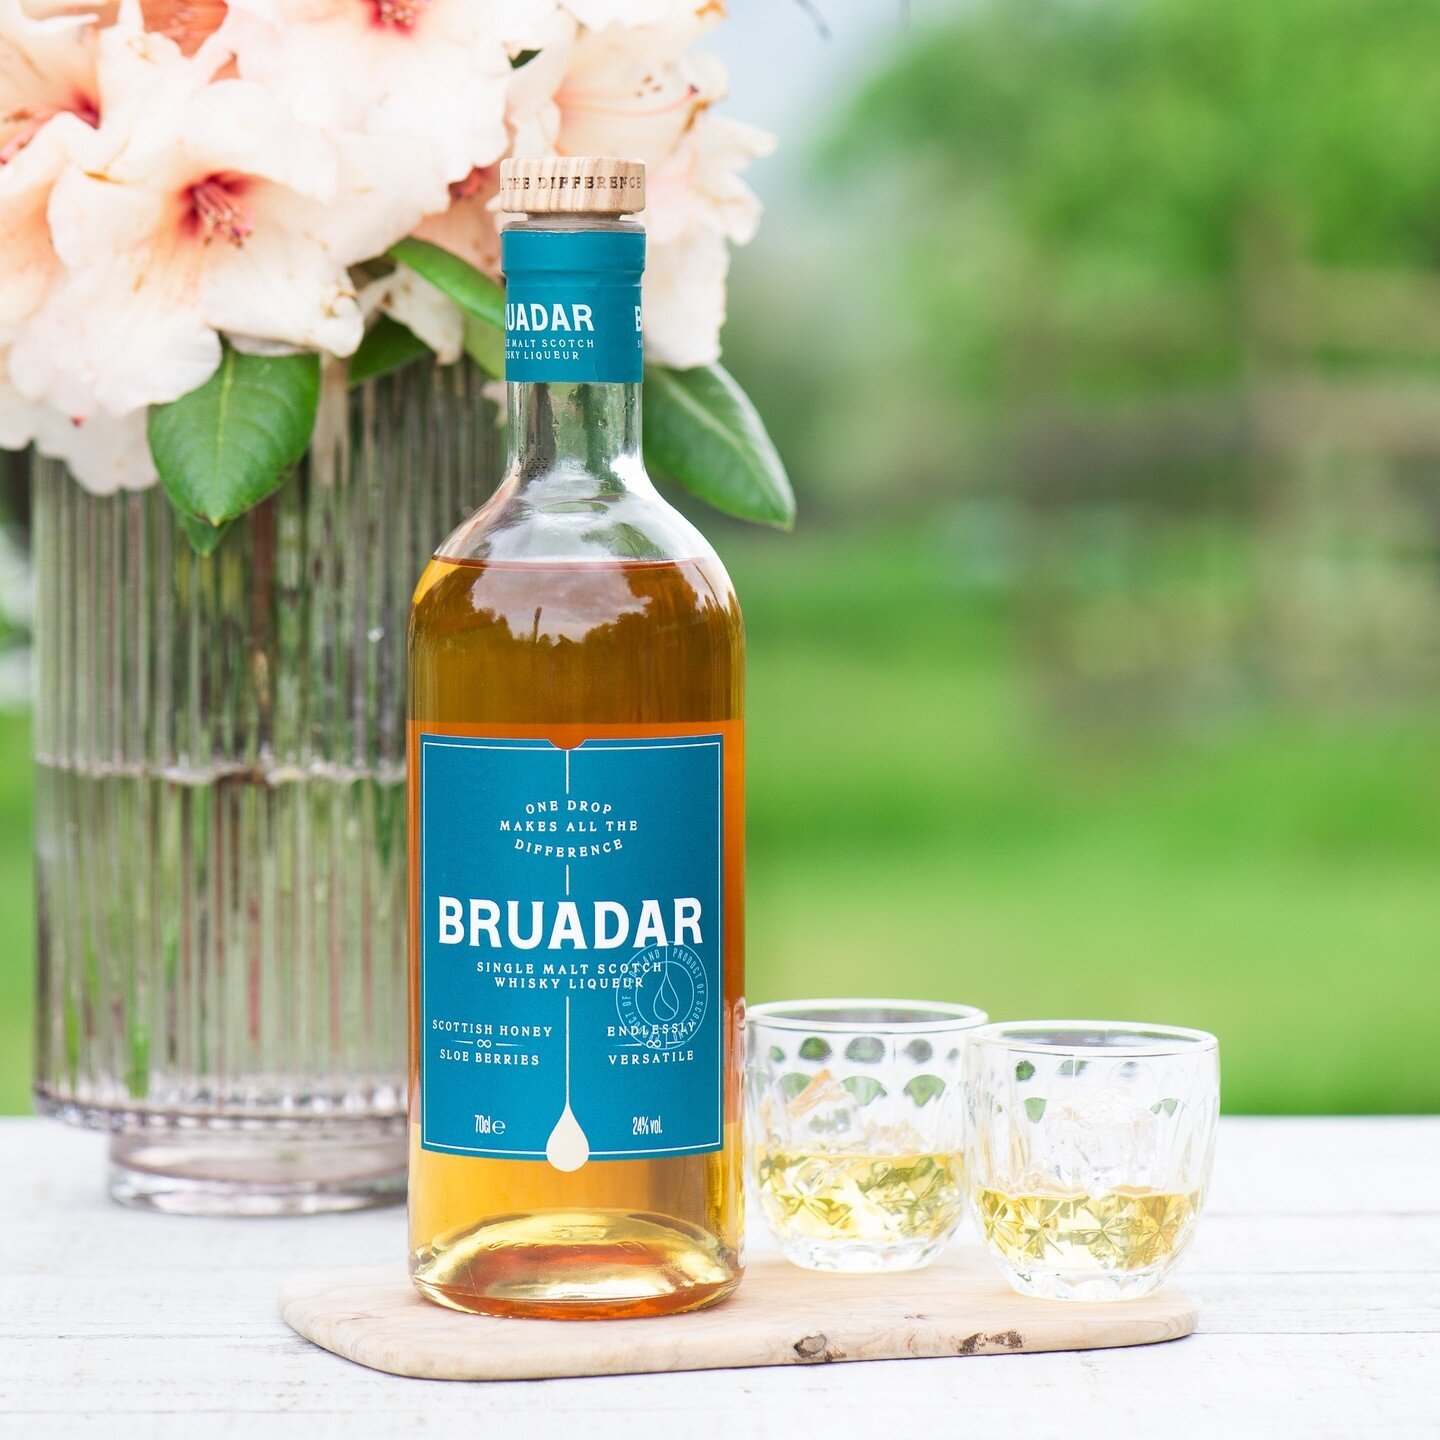 Bruadar has rich honey and fragrant floral notes on the nose, developing into fresh blossom on the palate with a silky-smooth finish. ⁠
.⁠
.⁠
.⁠
#bruadar #singlemaltwhiskyliqueur #liqueur #scotland #scotch #singlemalt #malt #instawhisky #morrisonscot